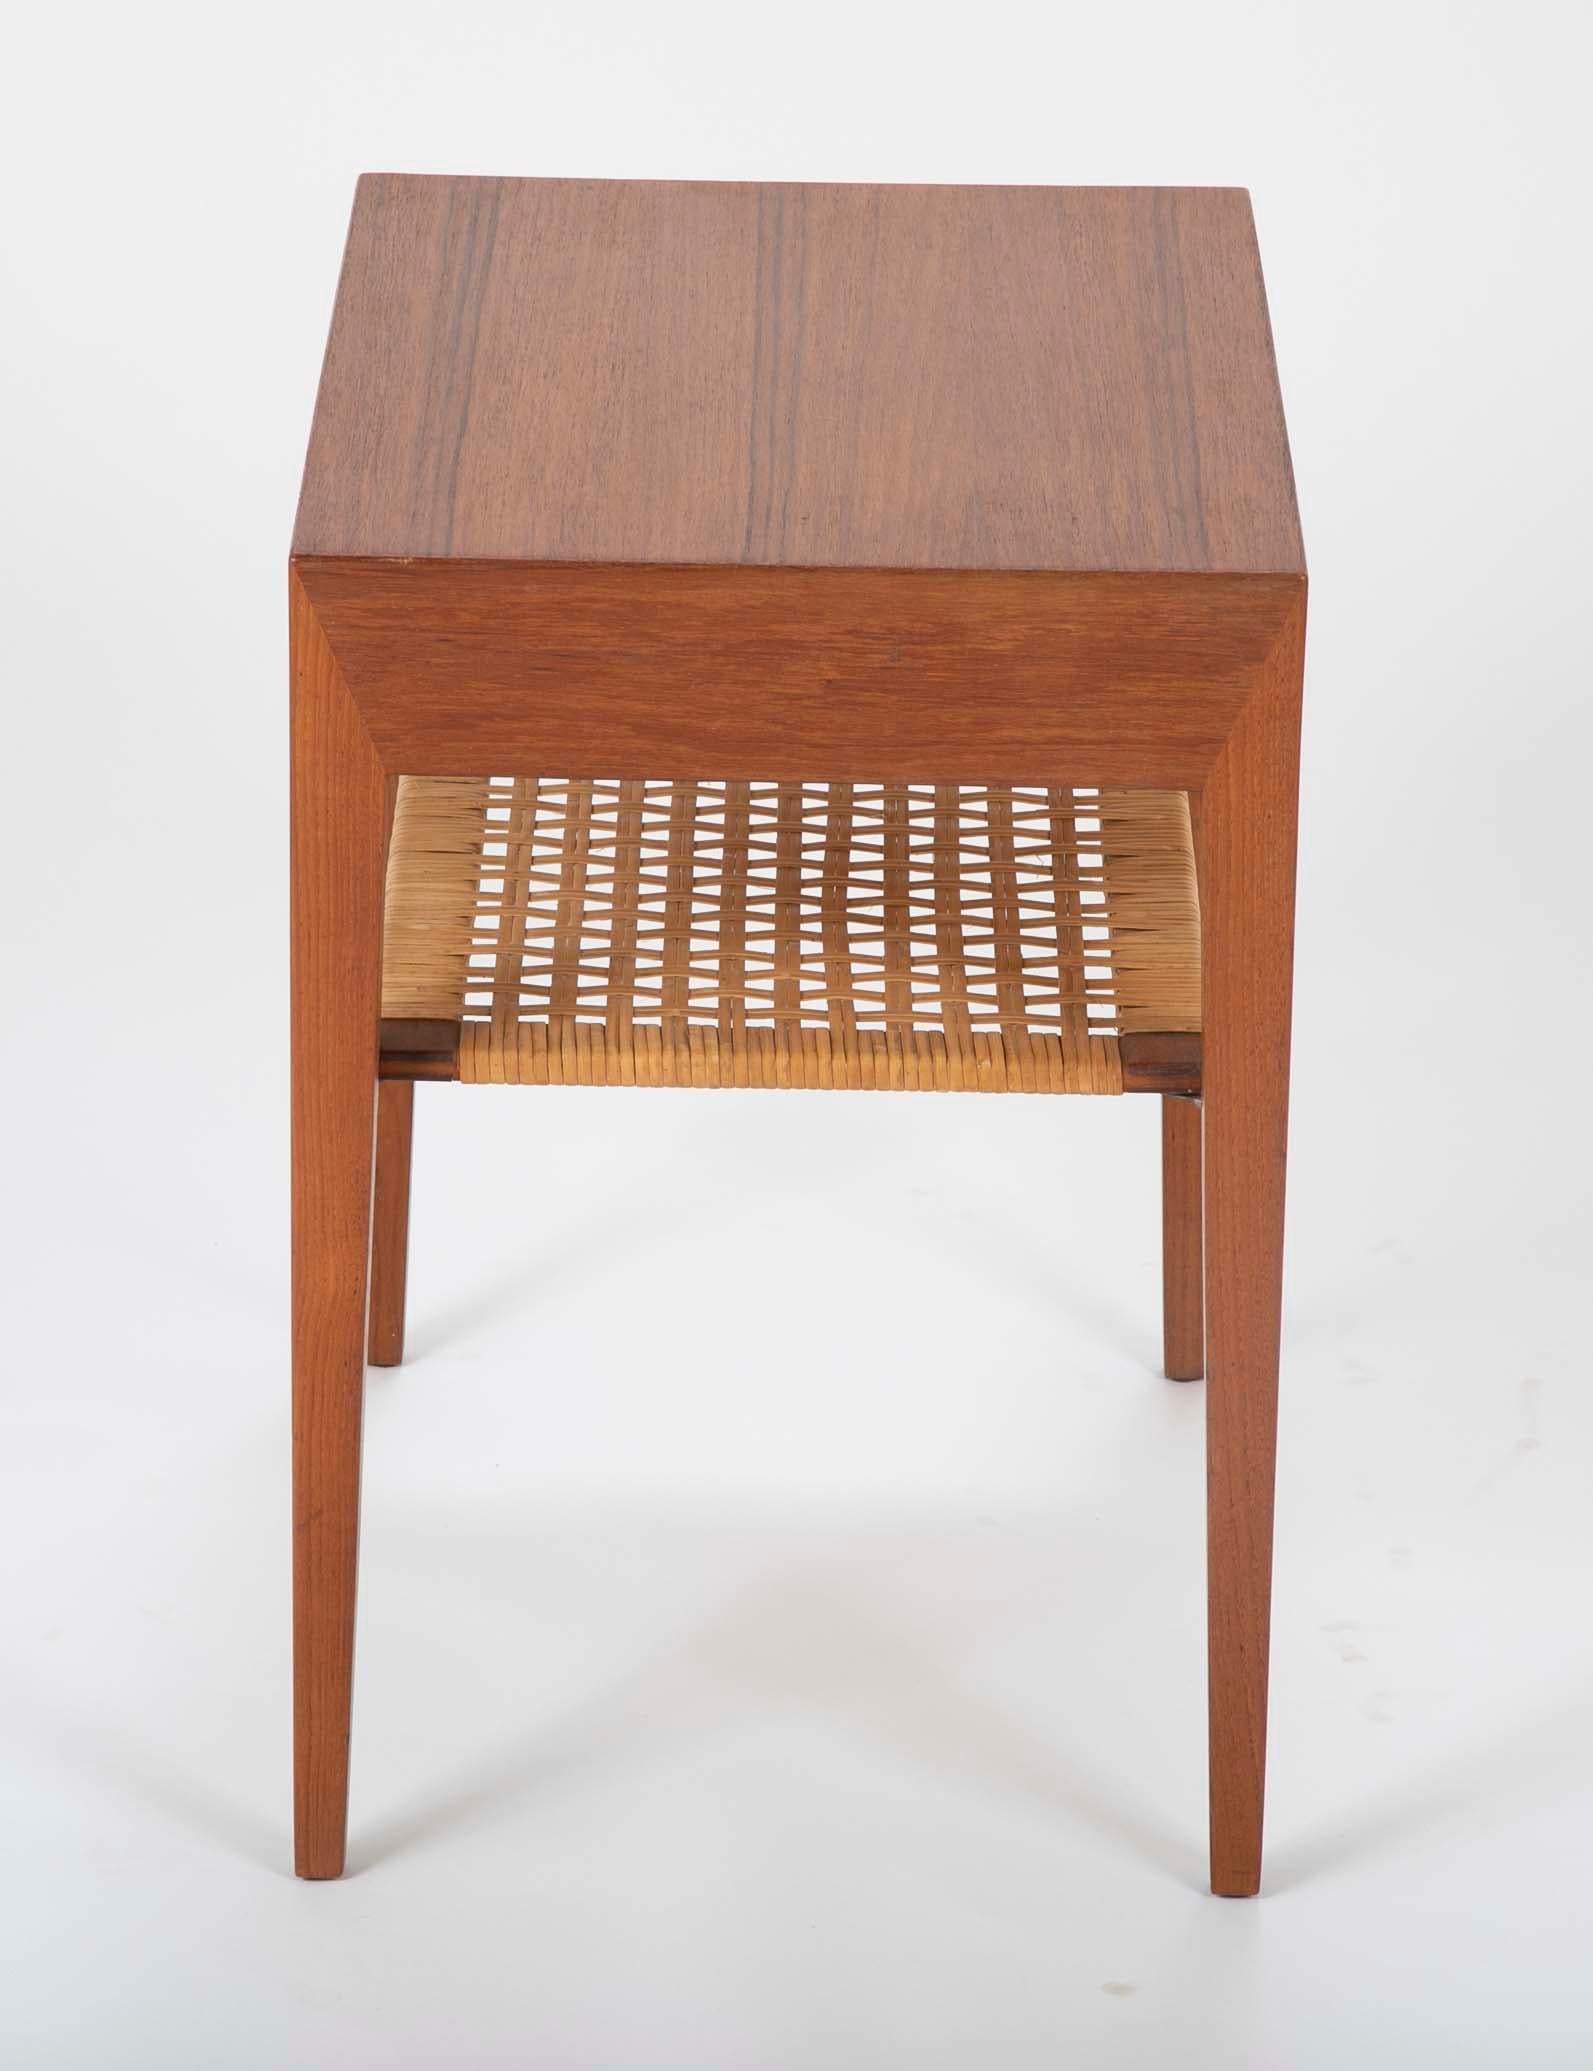 Caning Pair of Teak Bedside Tables with Rush Shelf Designed by Severin Hansen Jr.